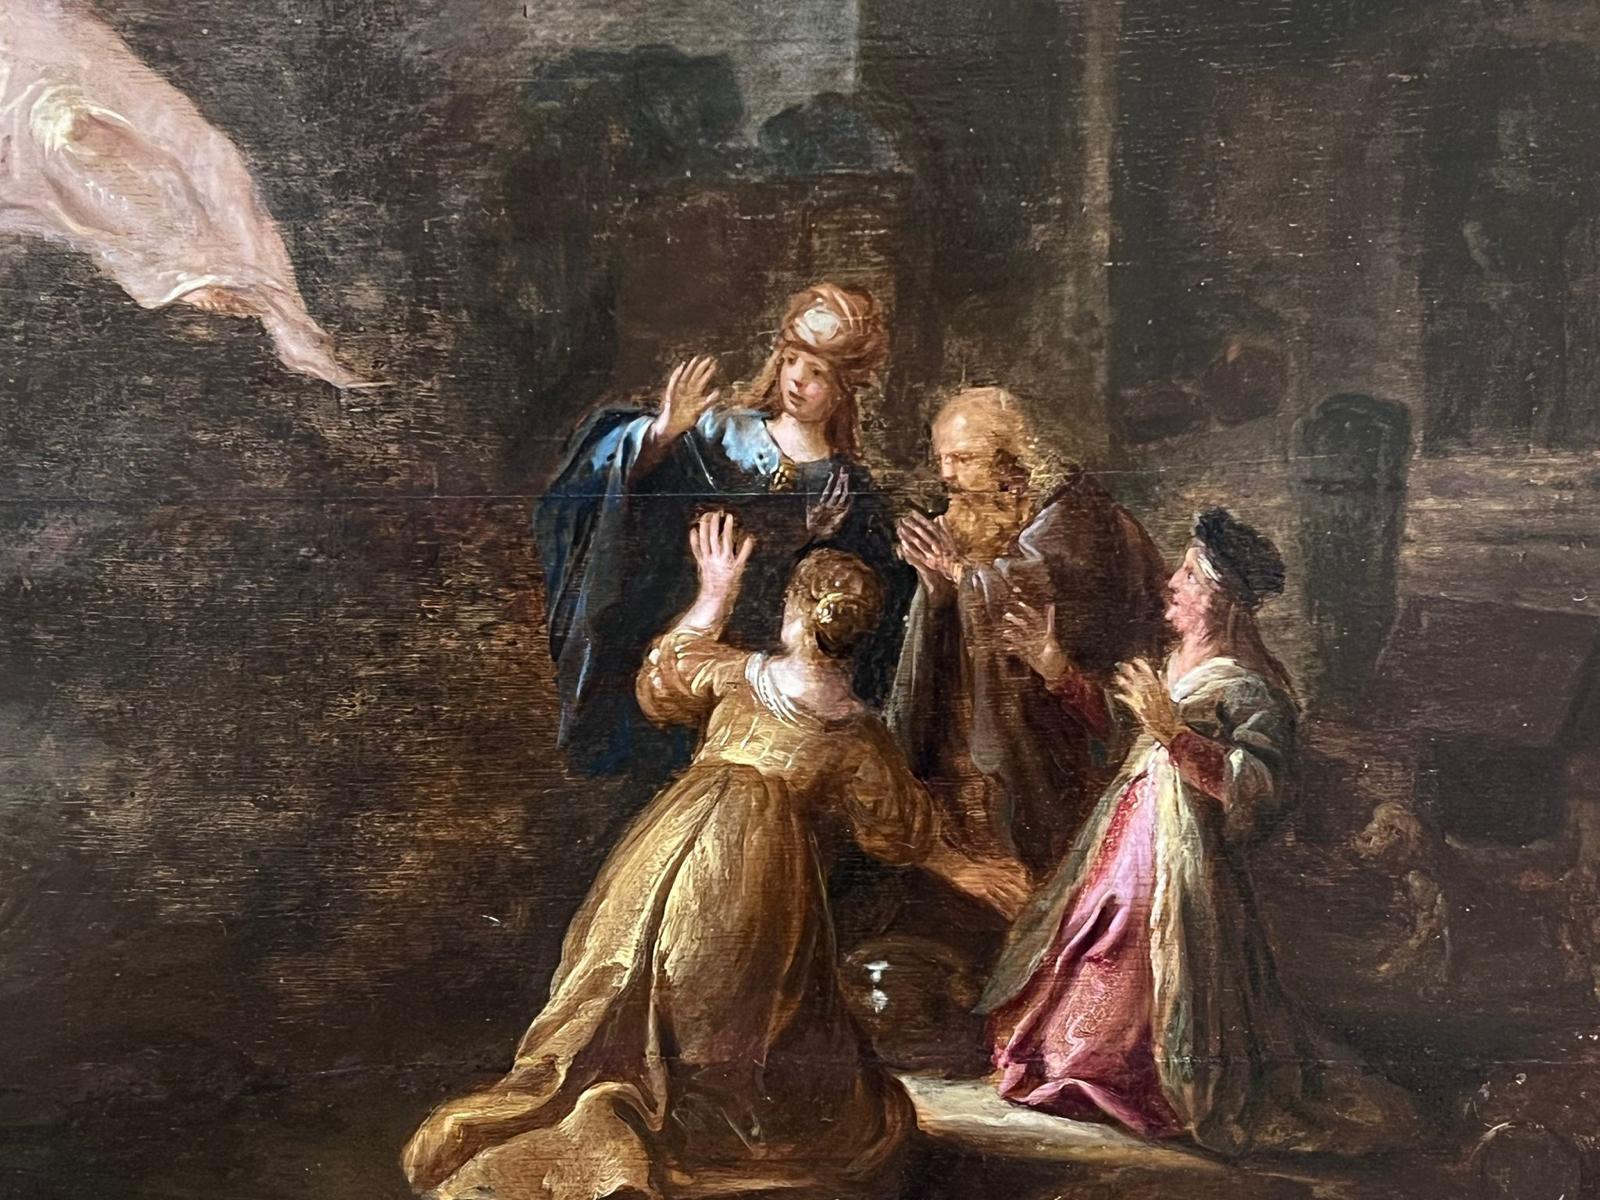 The Angelic Visitation
Dutch School, mid 17th century
circle of Rembrandt (Dutch 1606-1669)
oil on wooden panel, framed in faux tortoiseshell style frame.
framed: 25 x 28.75
painting: 19 x 24 inches
provenance: private collection, Belgium
condition: